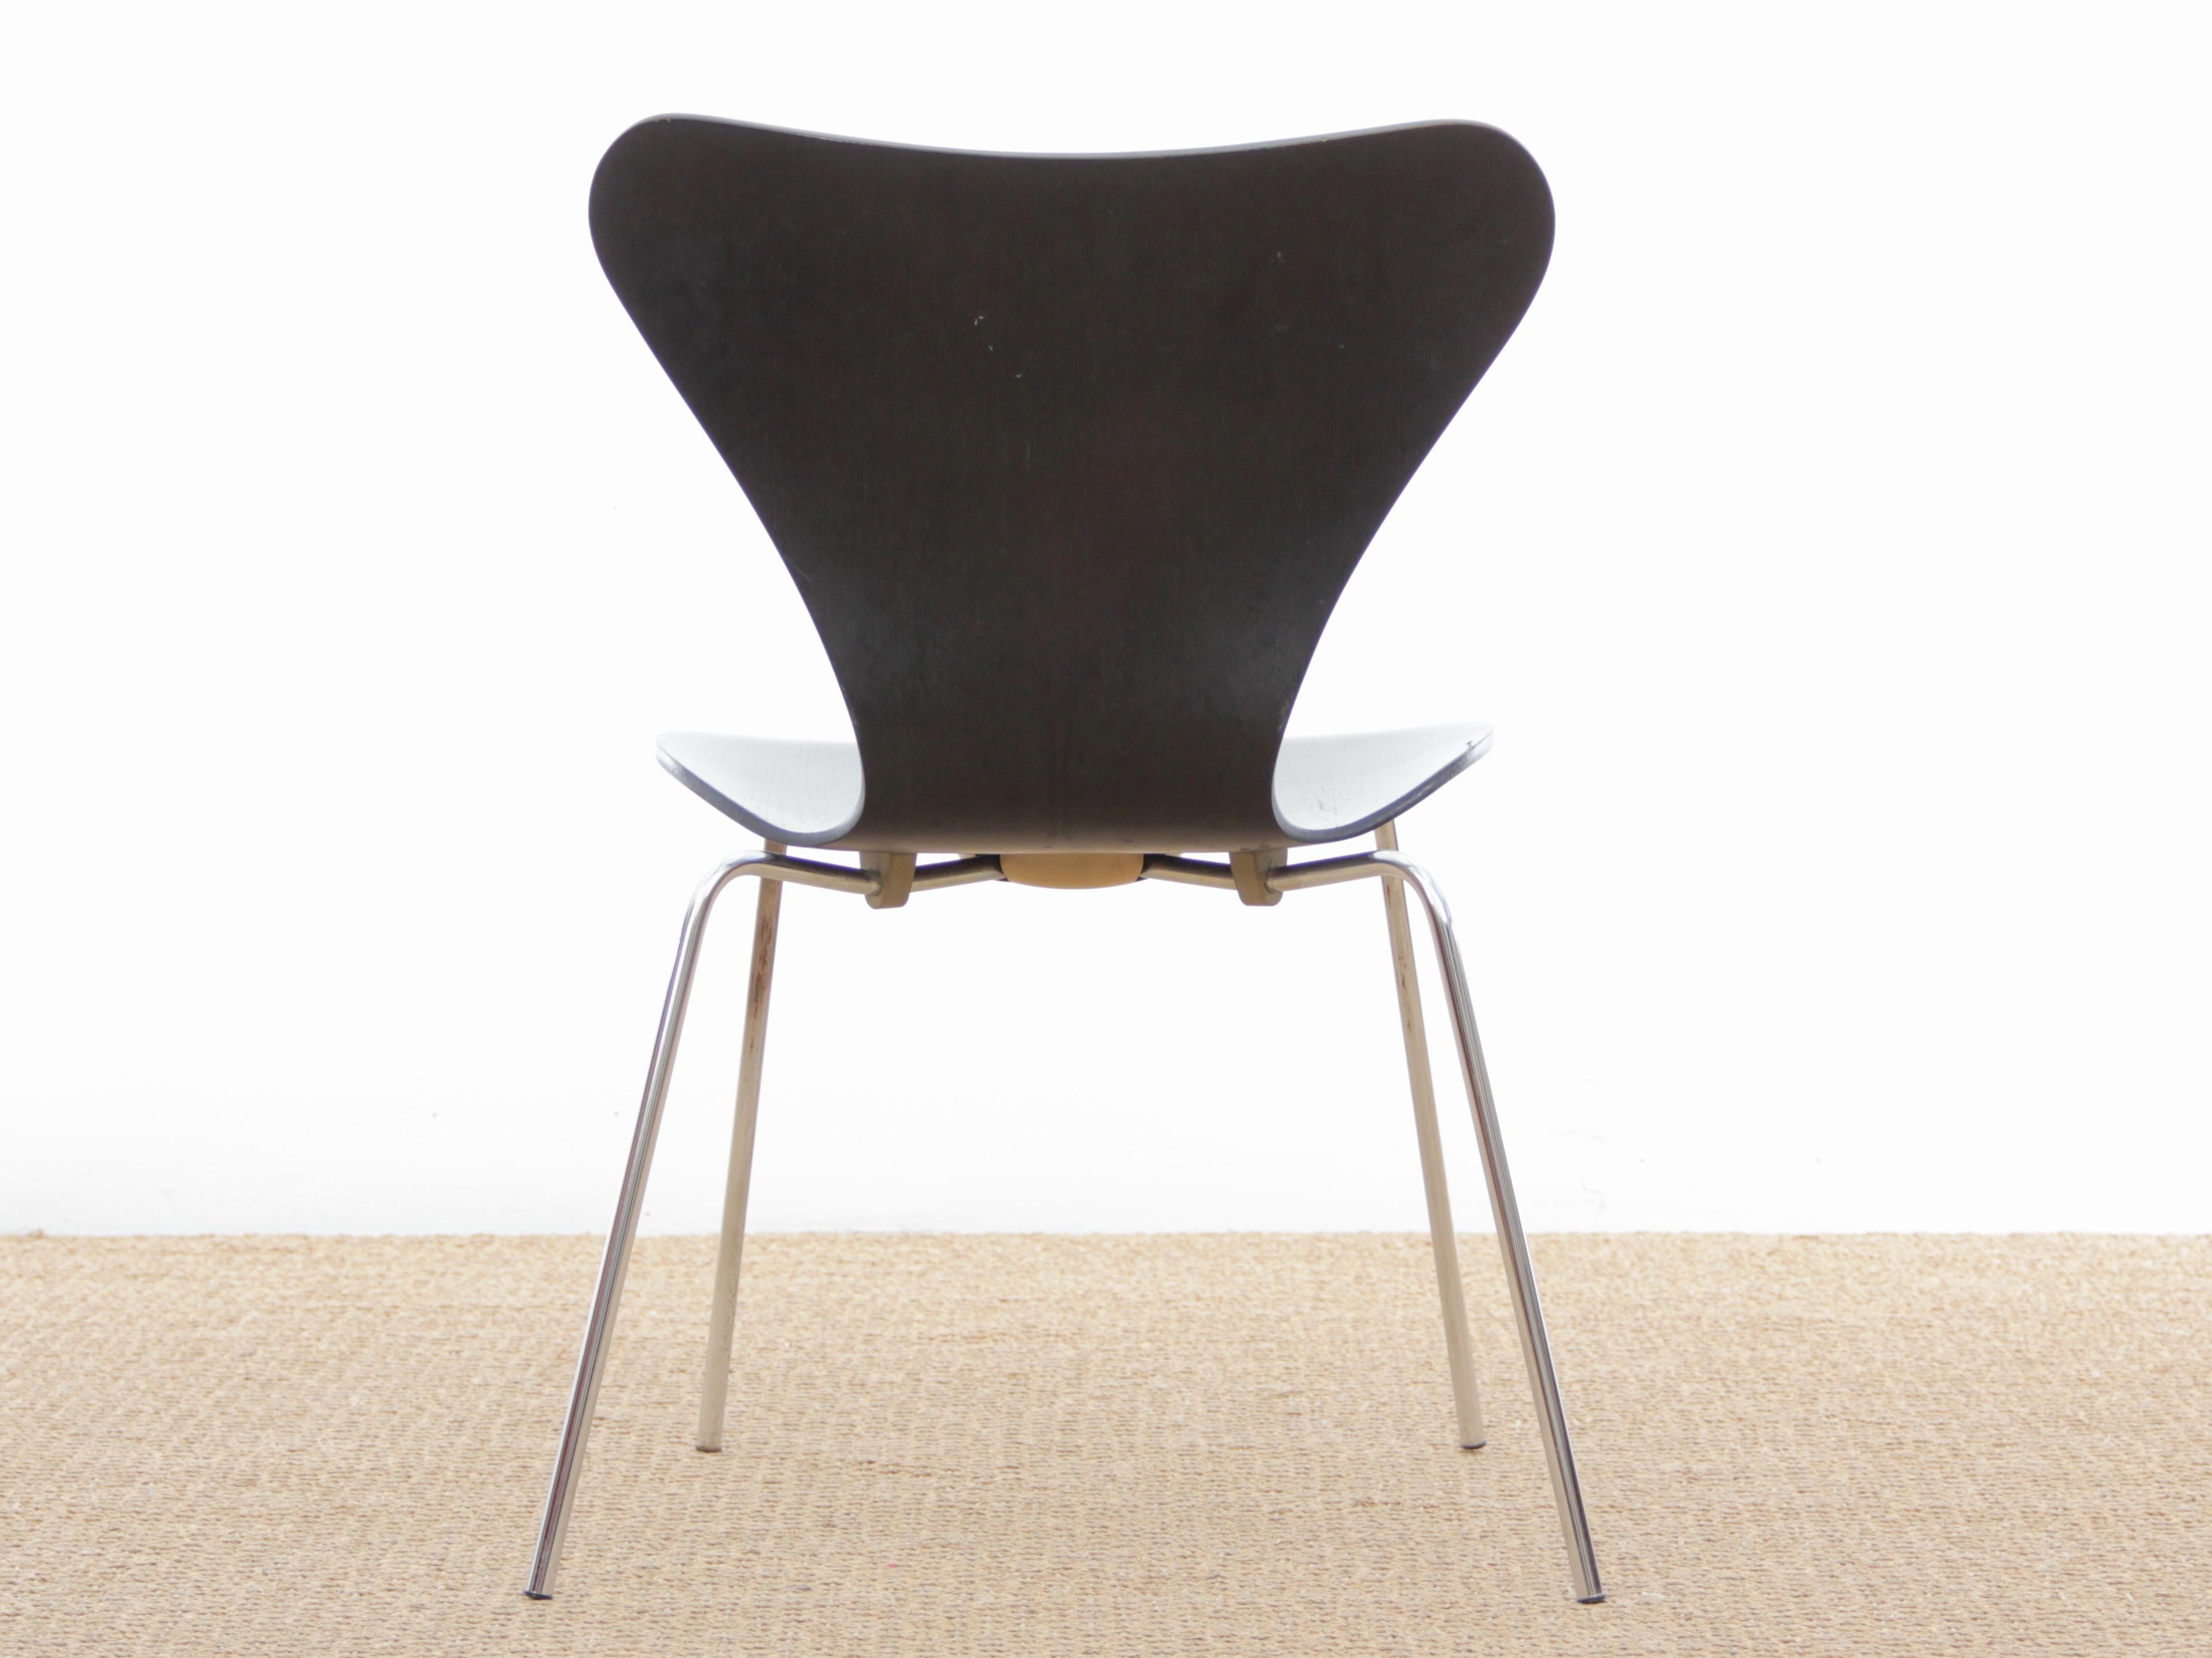 Late 20th Century Mid-Century Modern Scandinavian Set of 6 Chairs by Arne Jacobsen For Sale